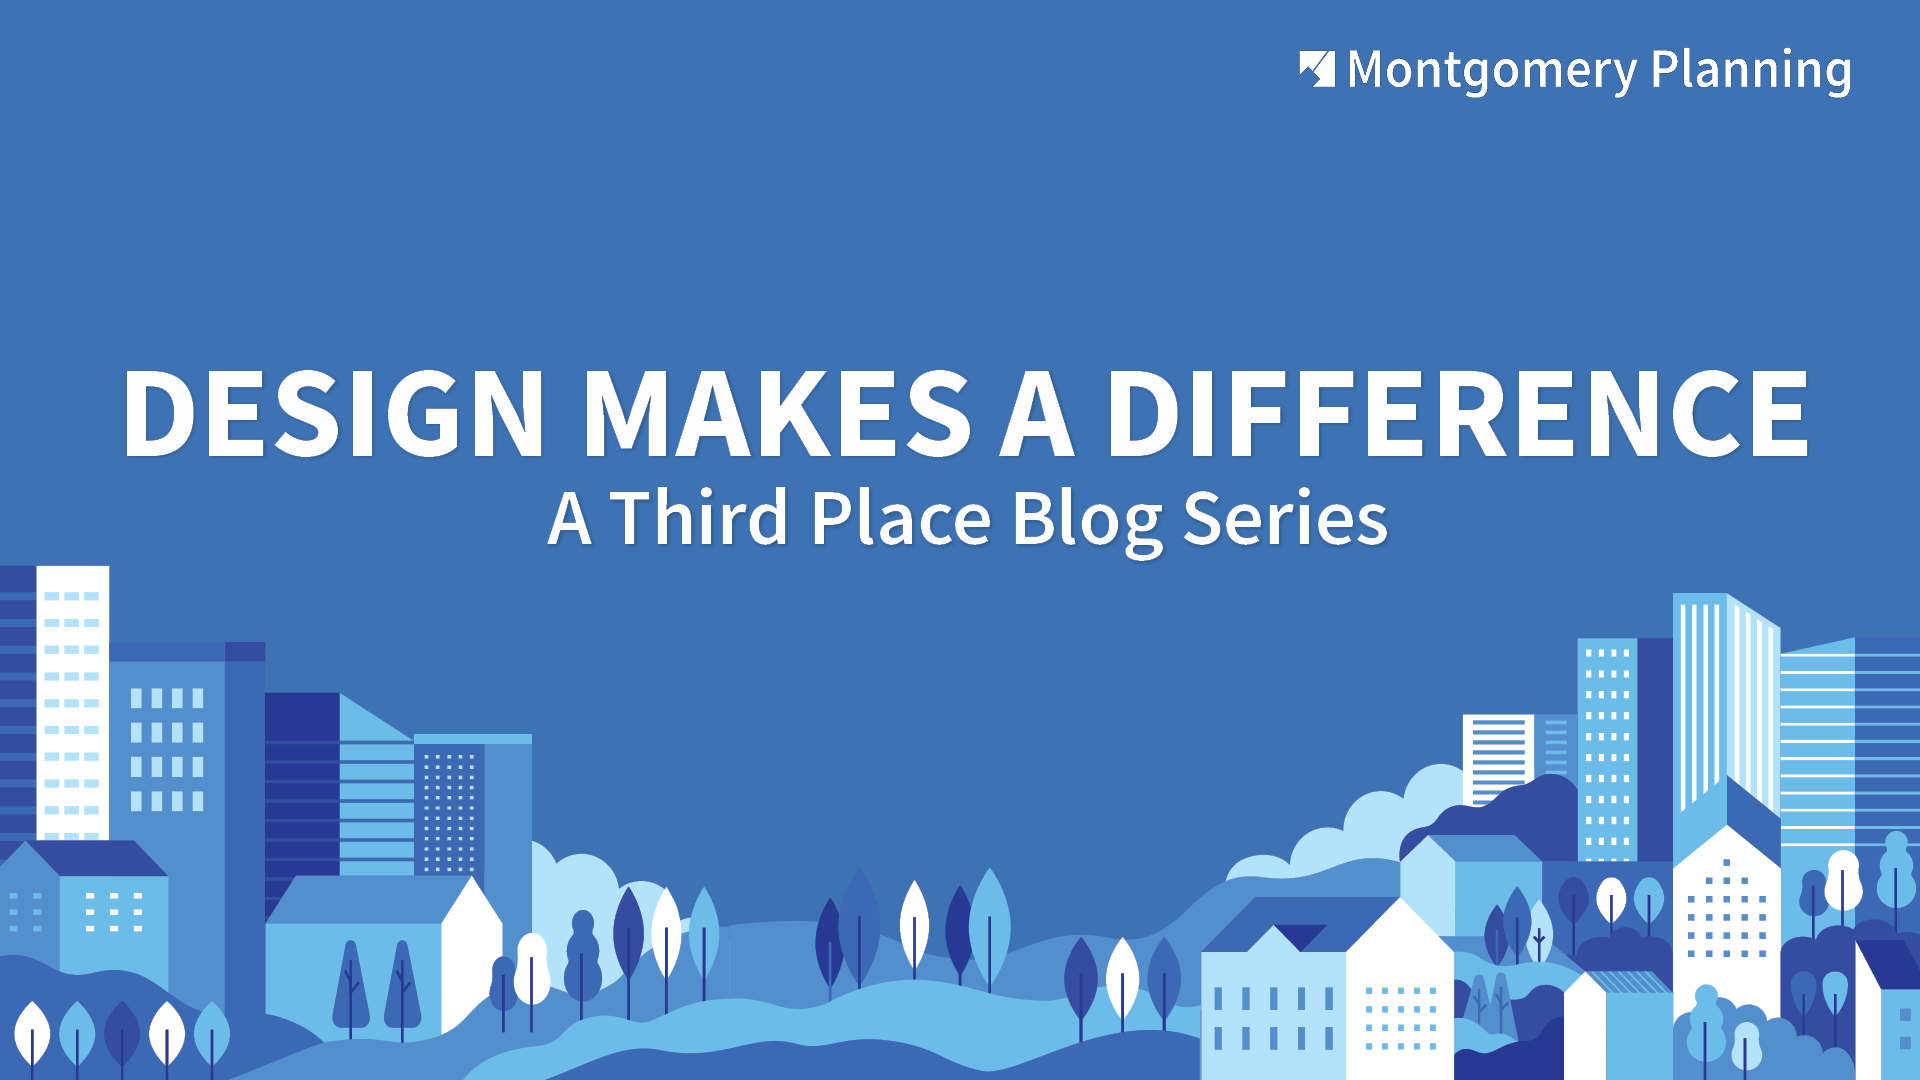 Design Makes a Difference: A Third Place Blog Series